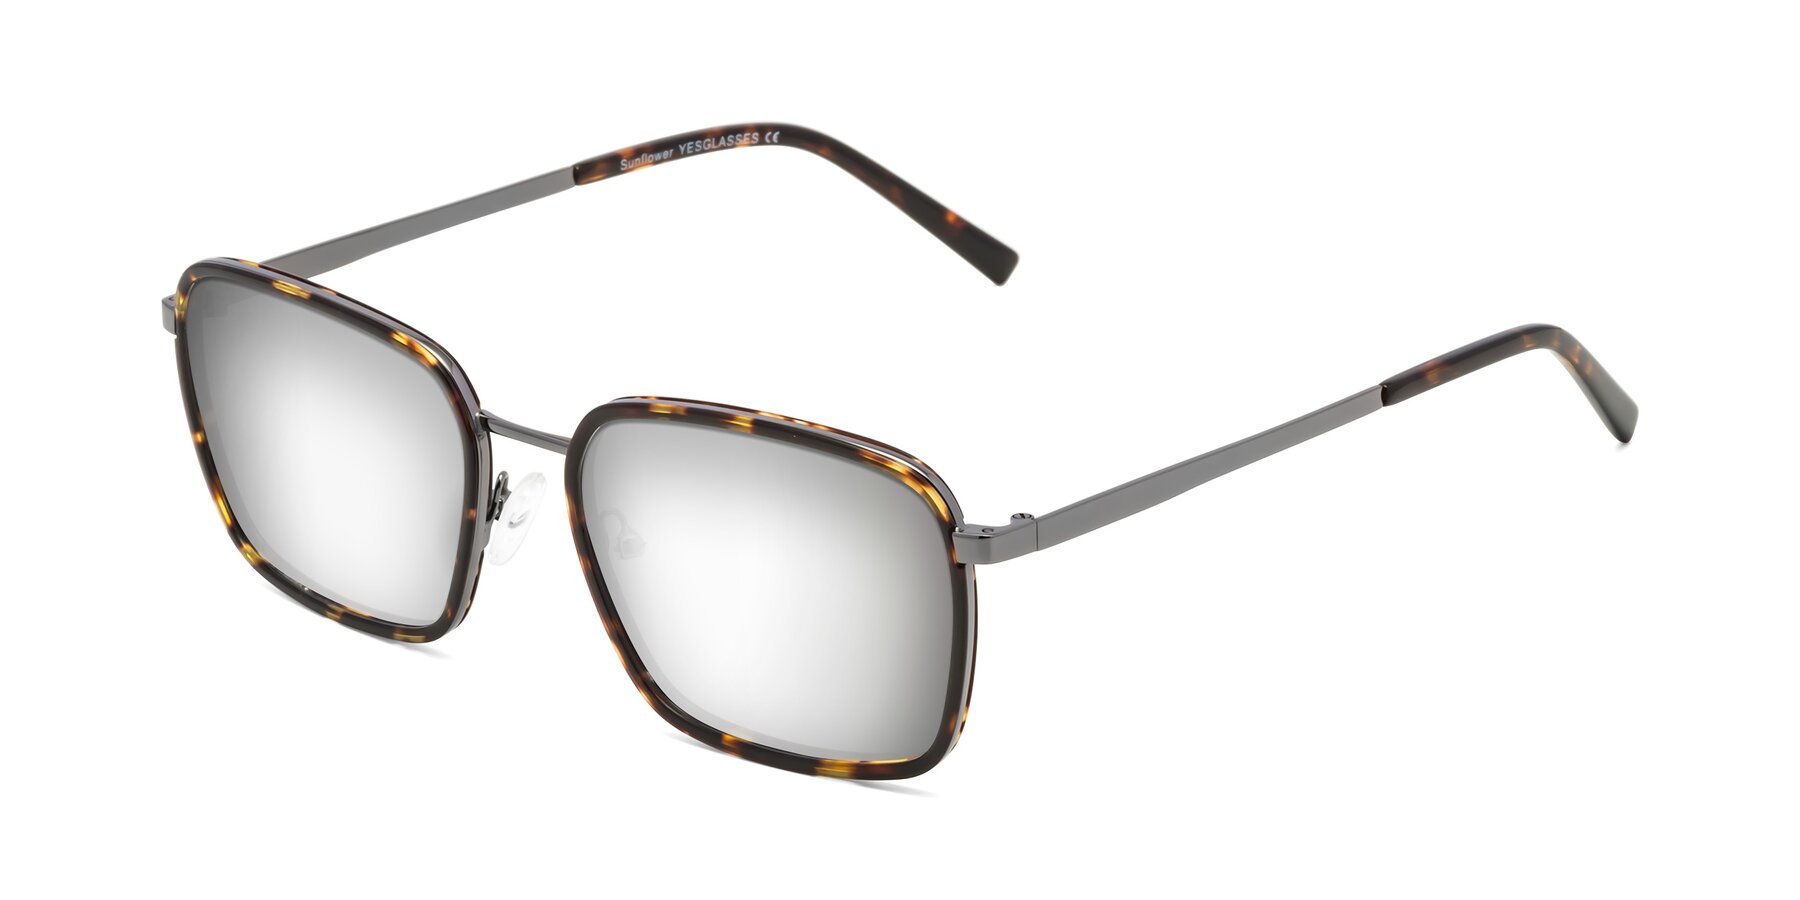 Angle of Sunflower in Tortoise-Gunmetal with Silver Mirrored Lenses